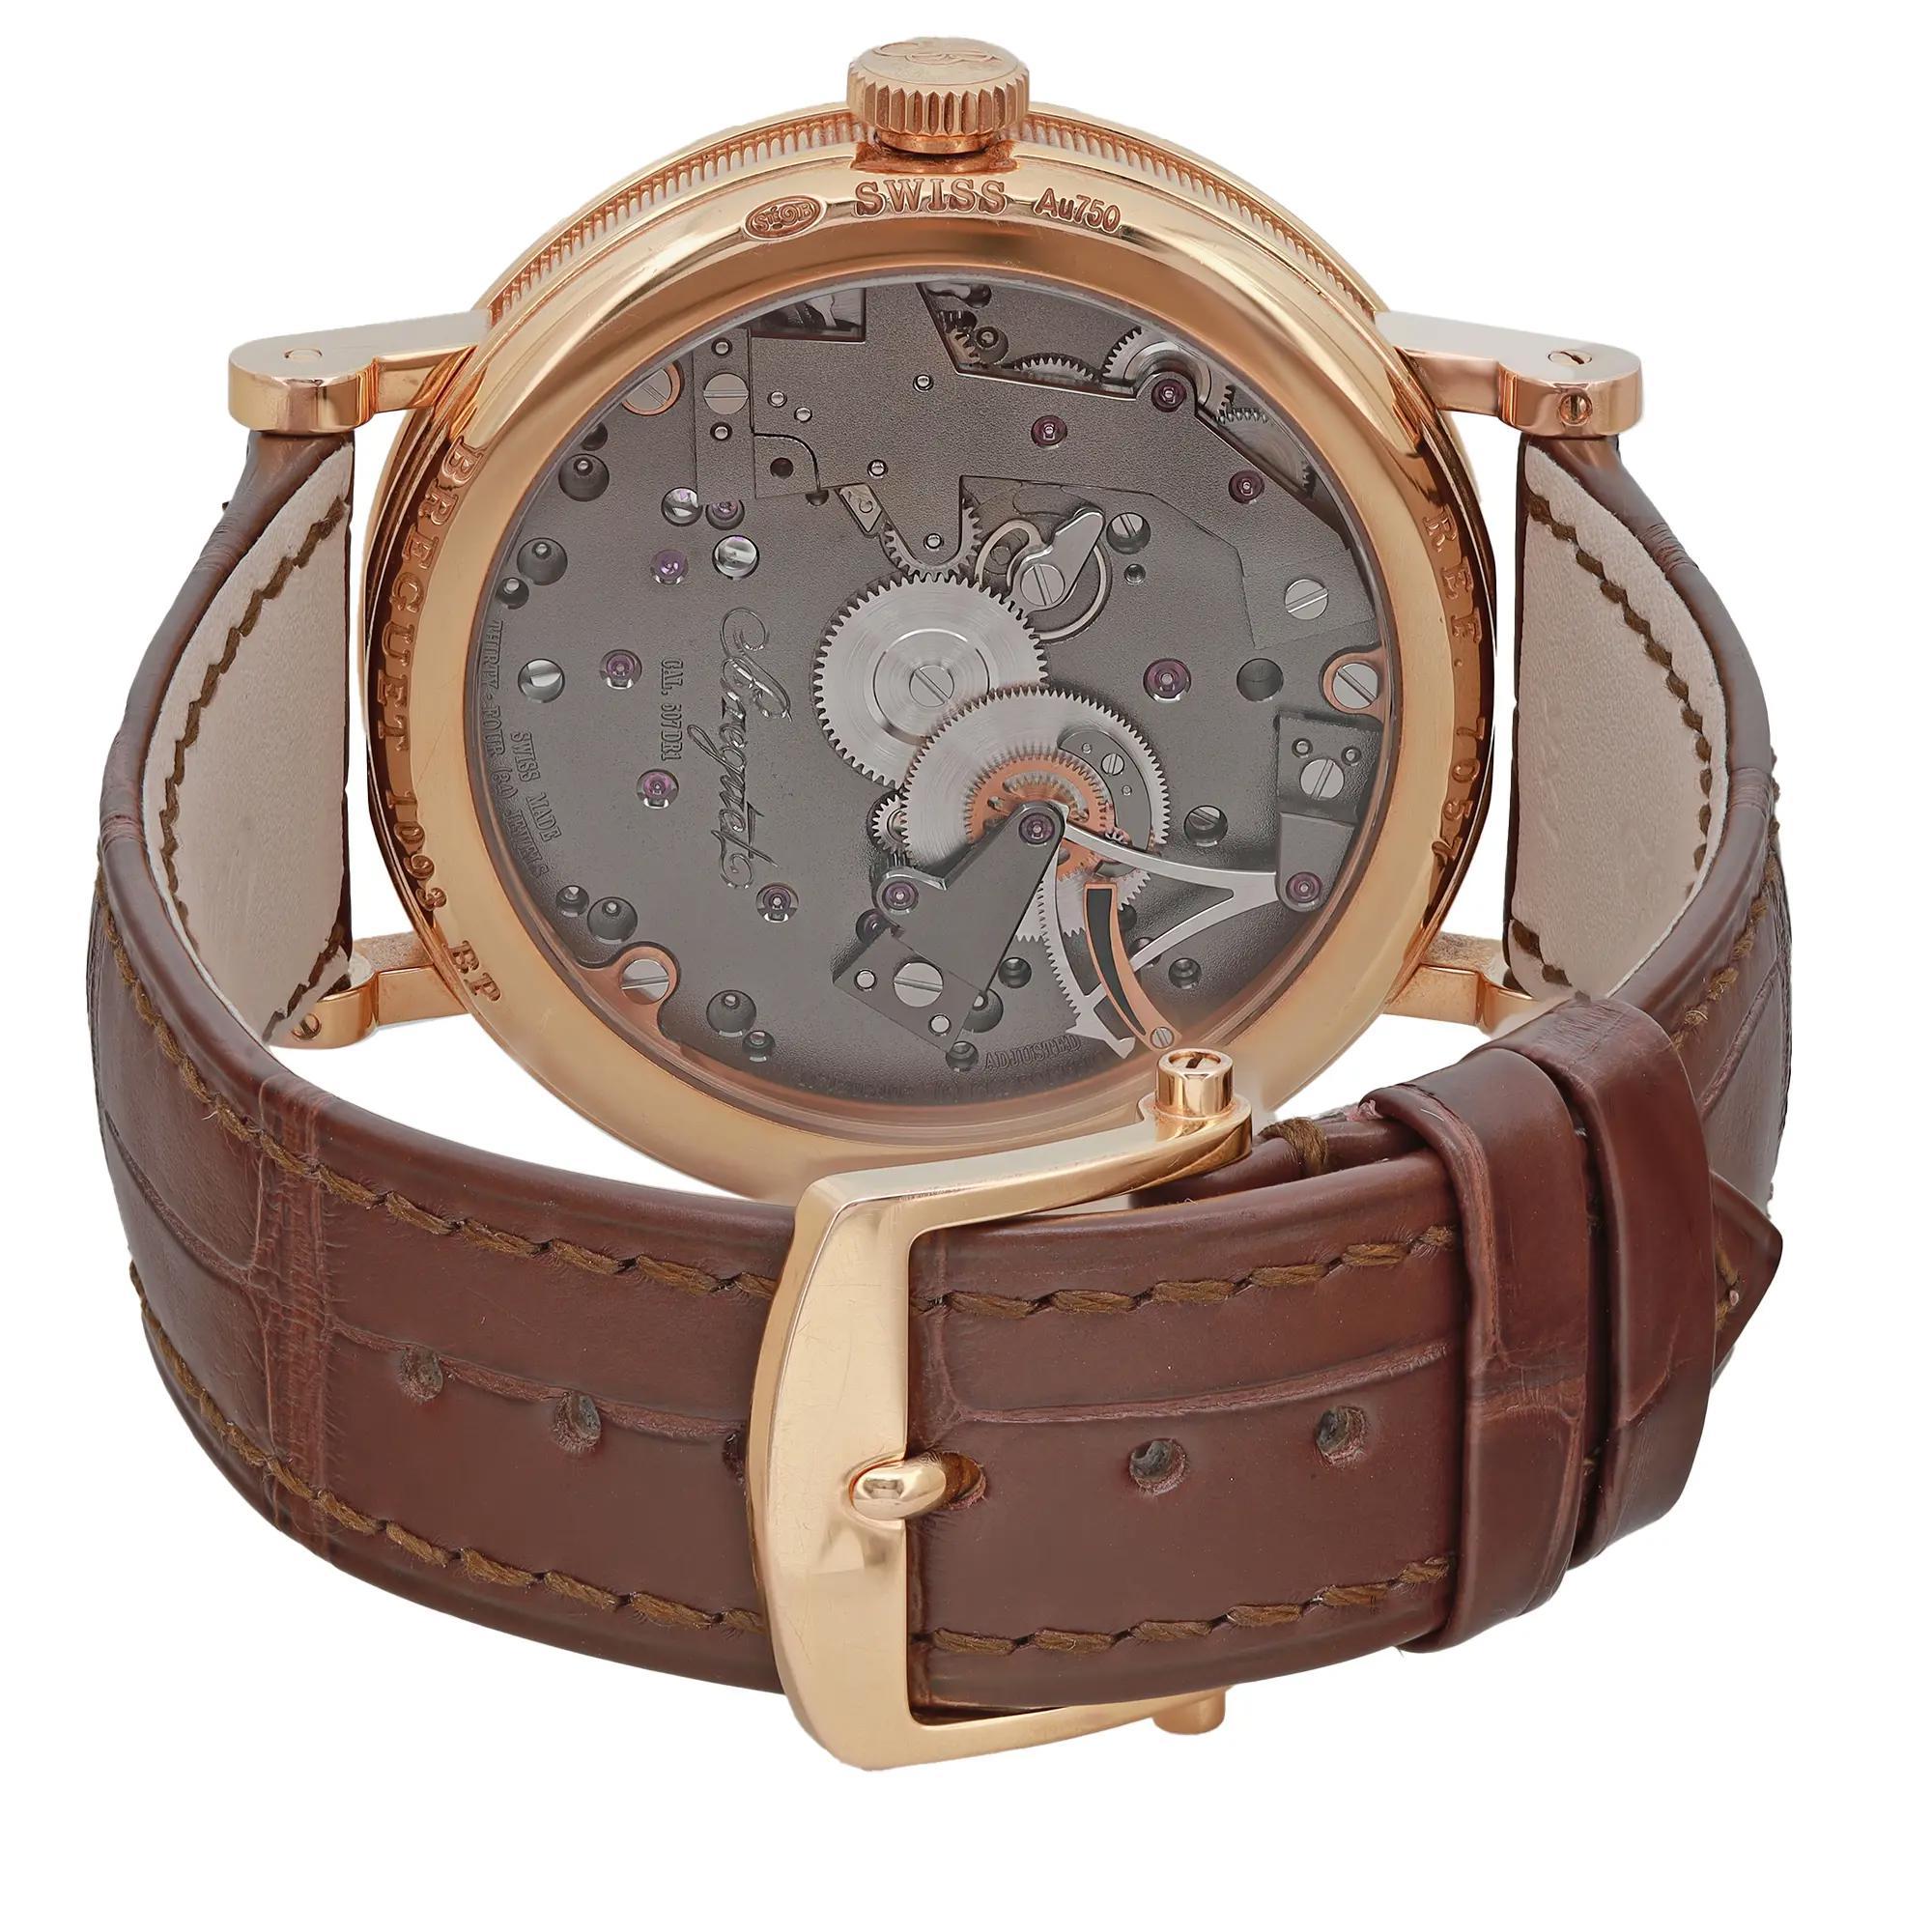 Breguet Tradition 18K Rose Gold Skeleton Dial Manual Wind Watch 7057BR/G9/9W6 For Sale 1